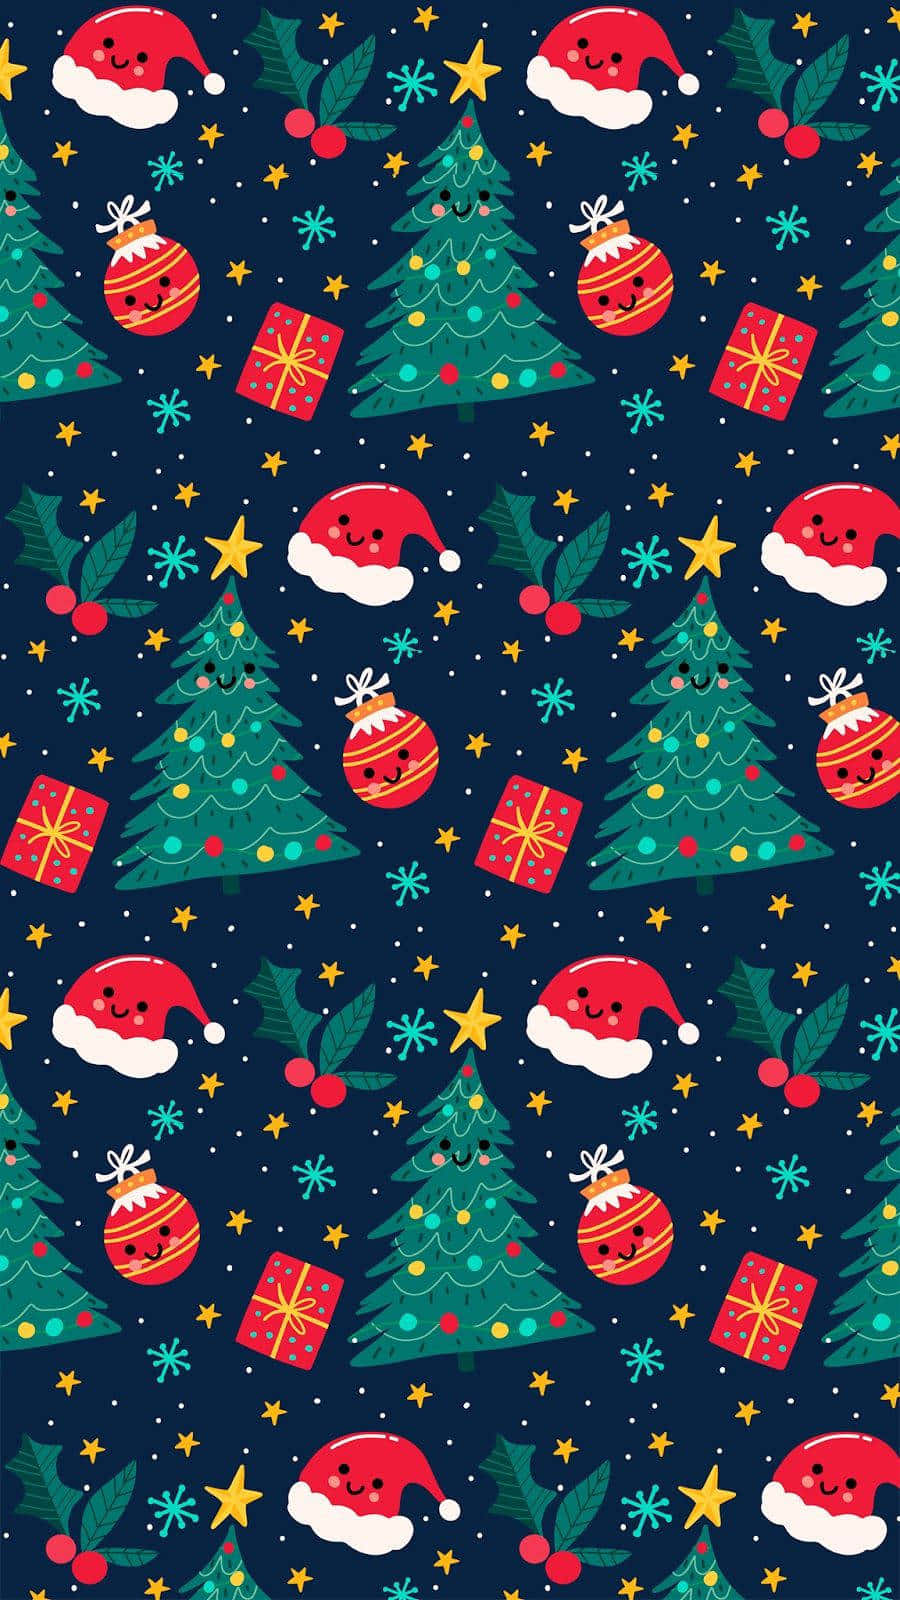 Celebrate a cozy and cute Christmas this season! Wallpaper